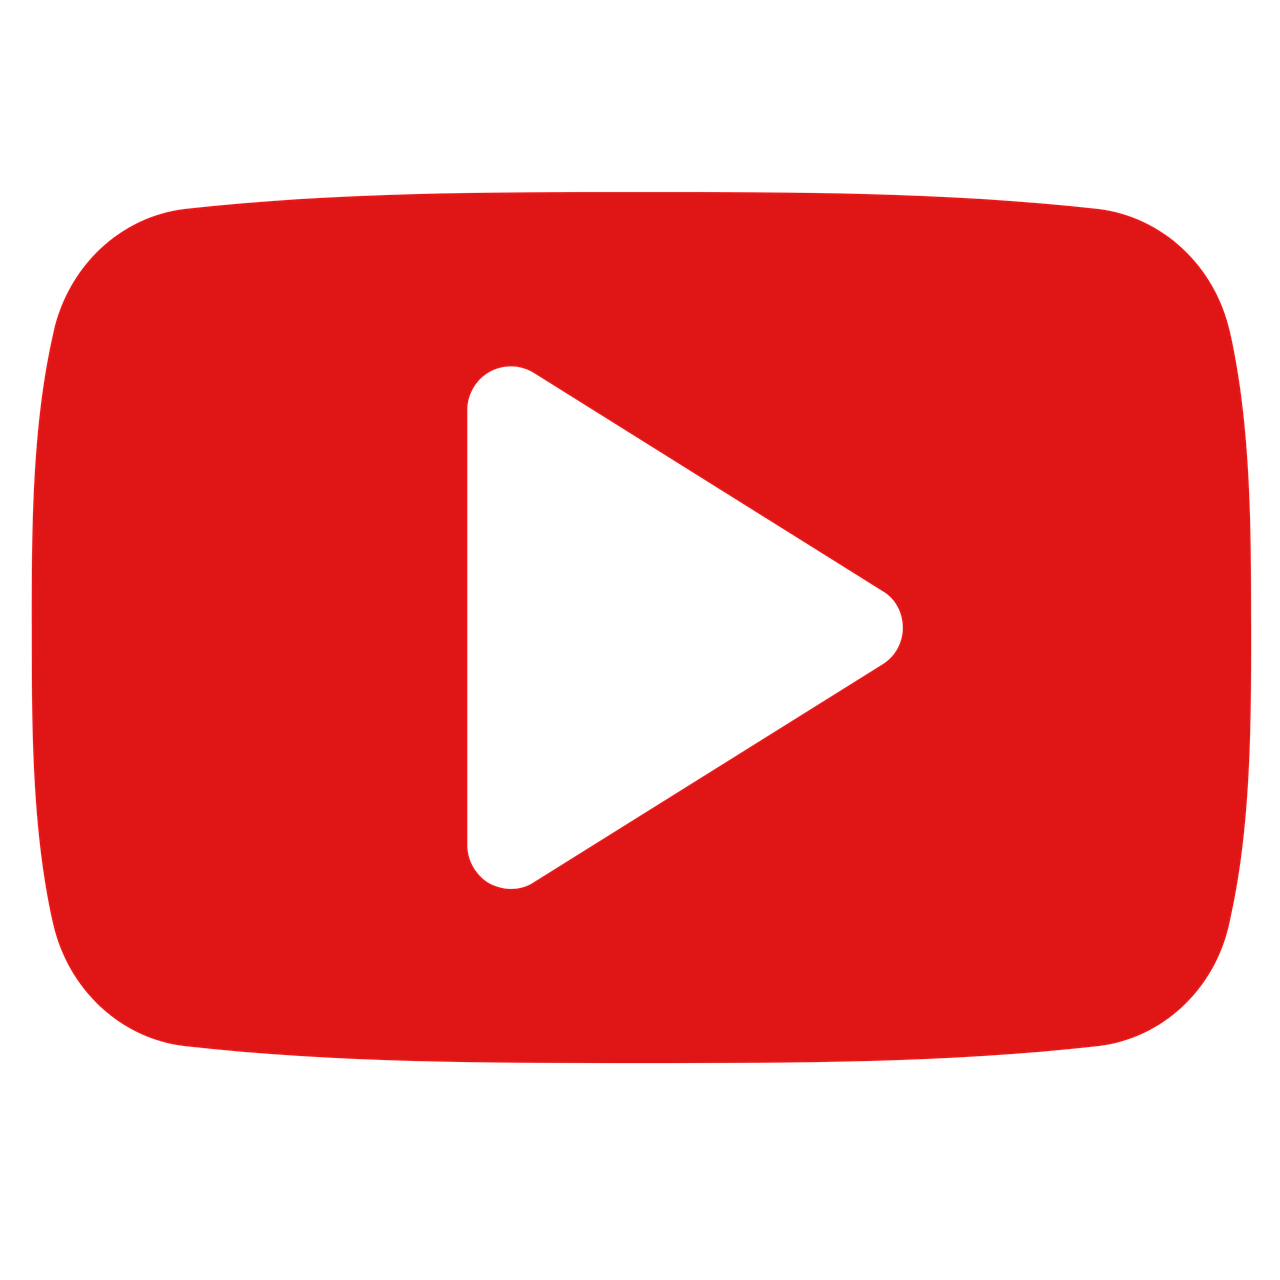 File:Youtube-button.png